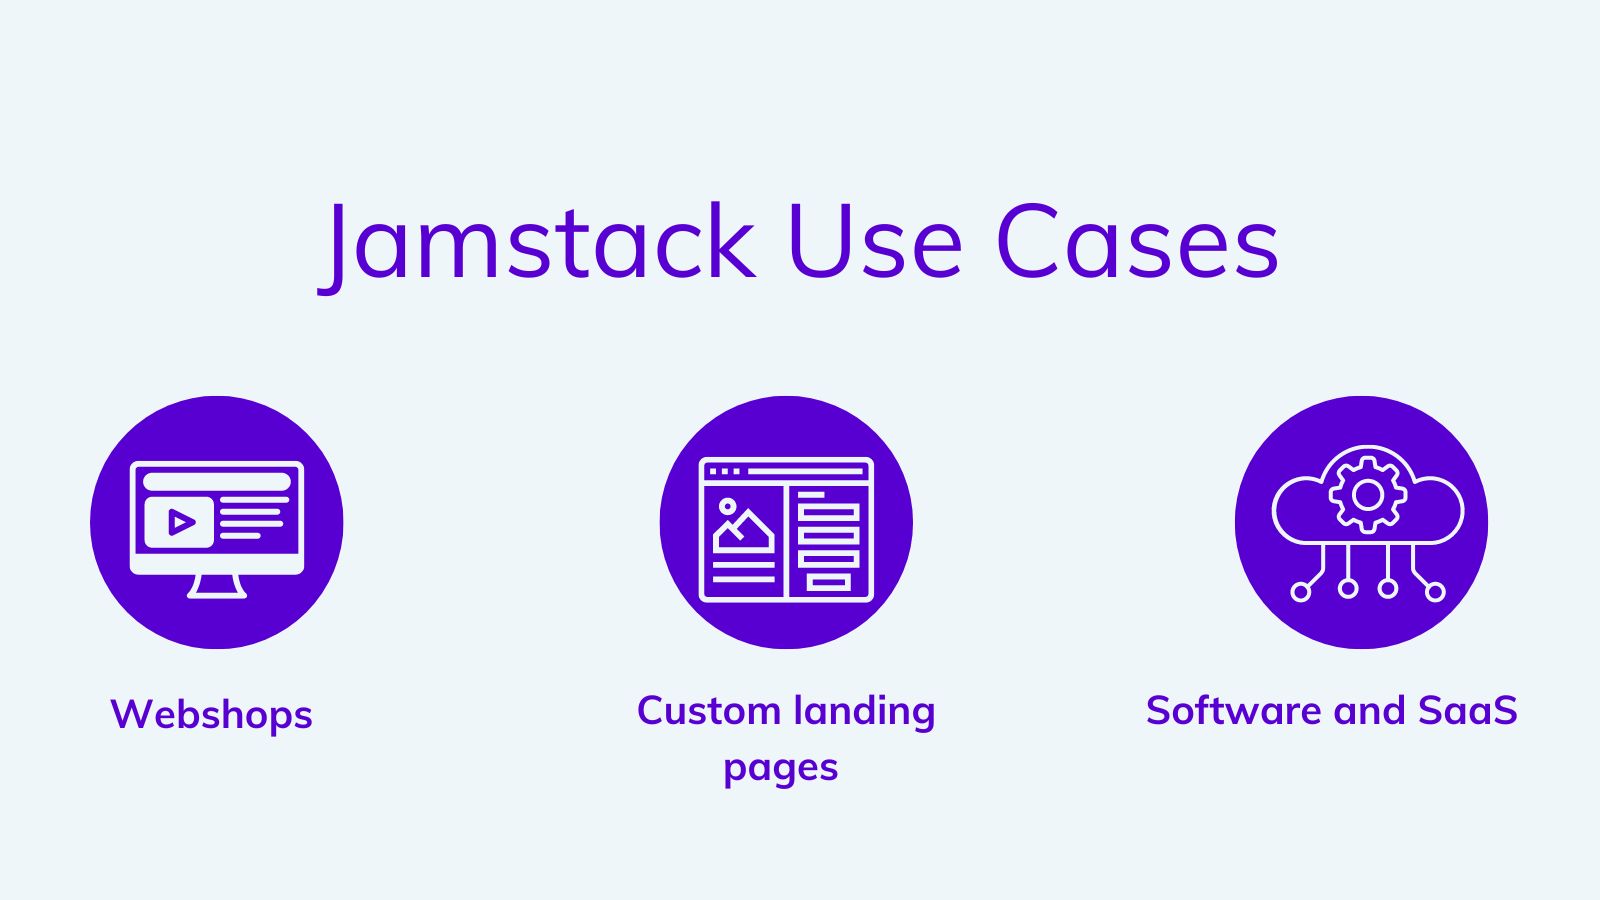 Jamstack use cases on agilitycms.com